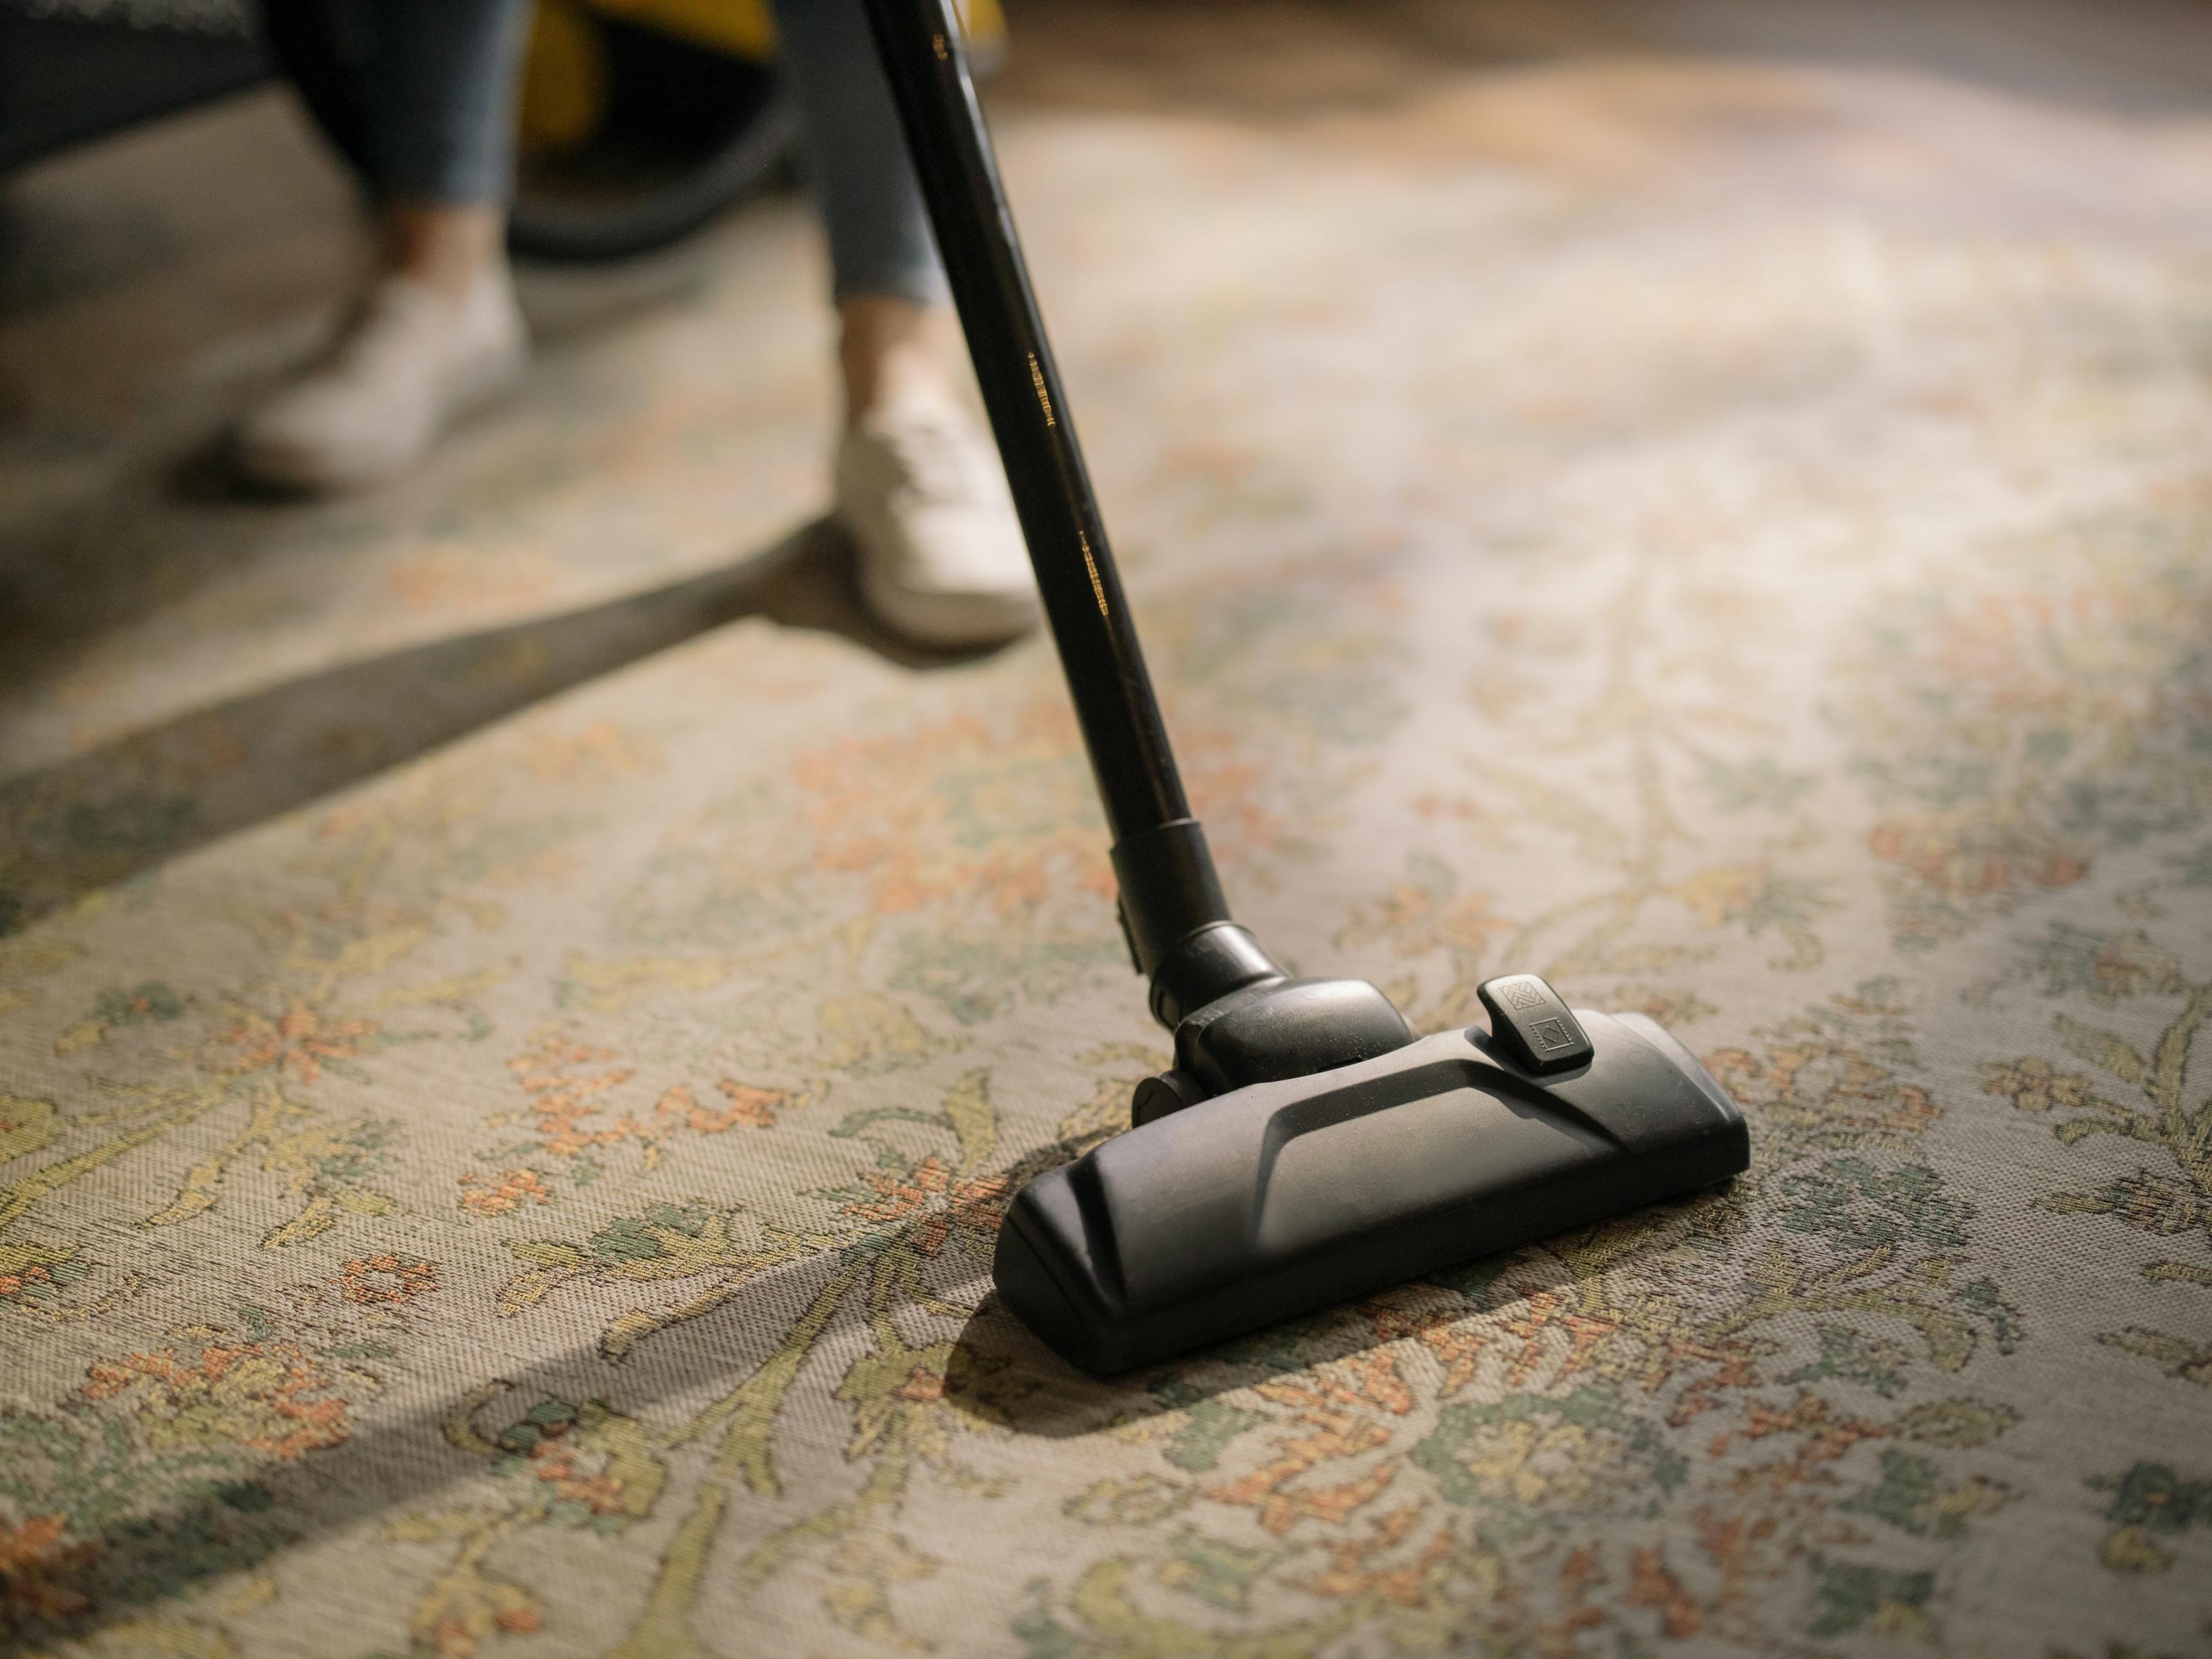 Moorestown Carpet Cleaner. Is Home Cleaning Carpet Safe?